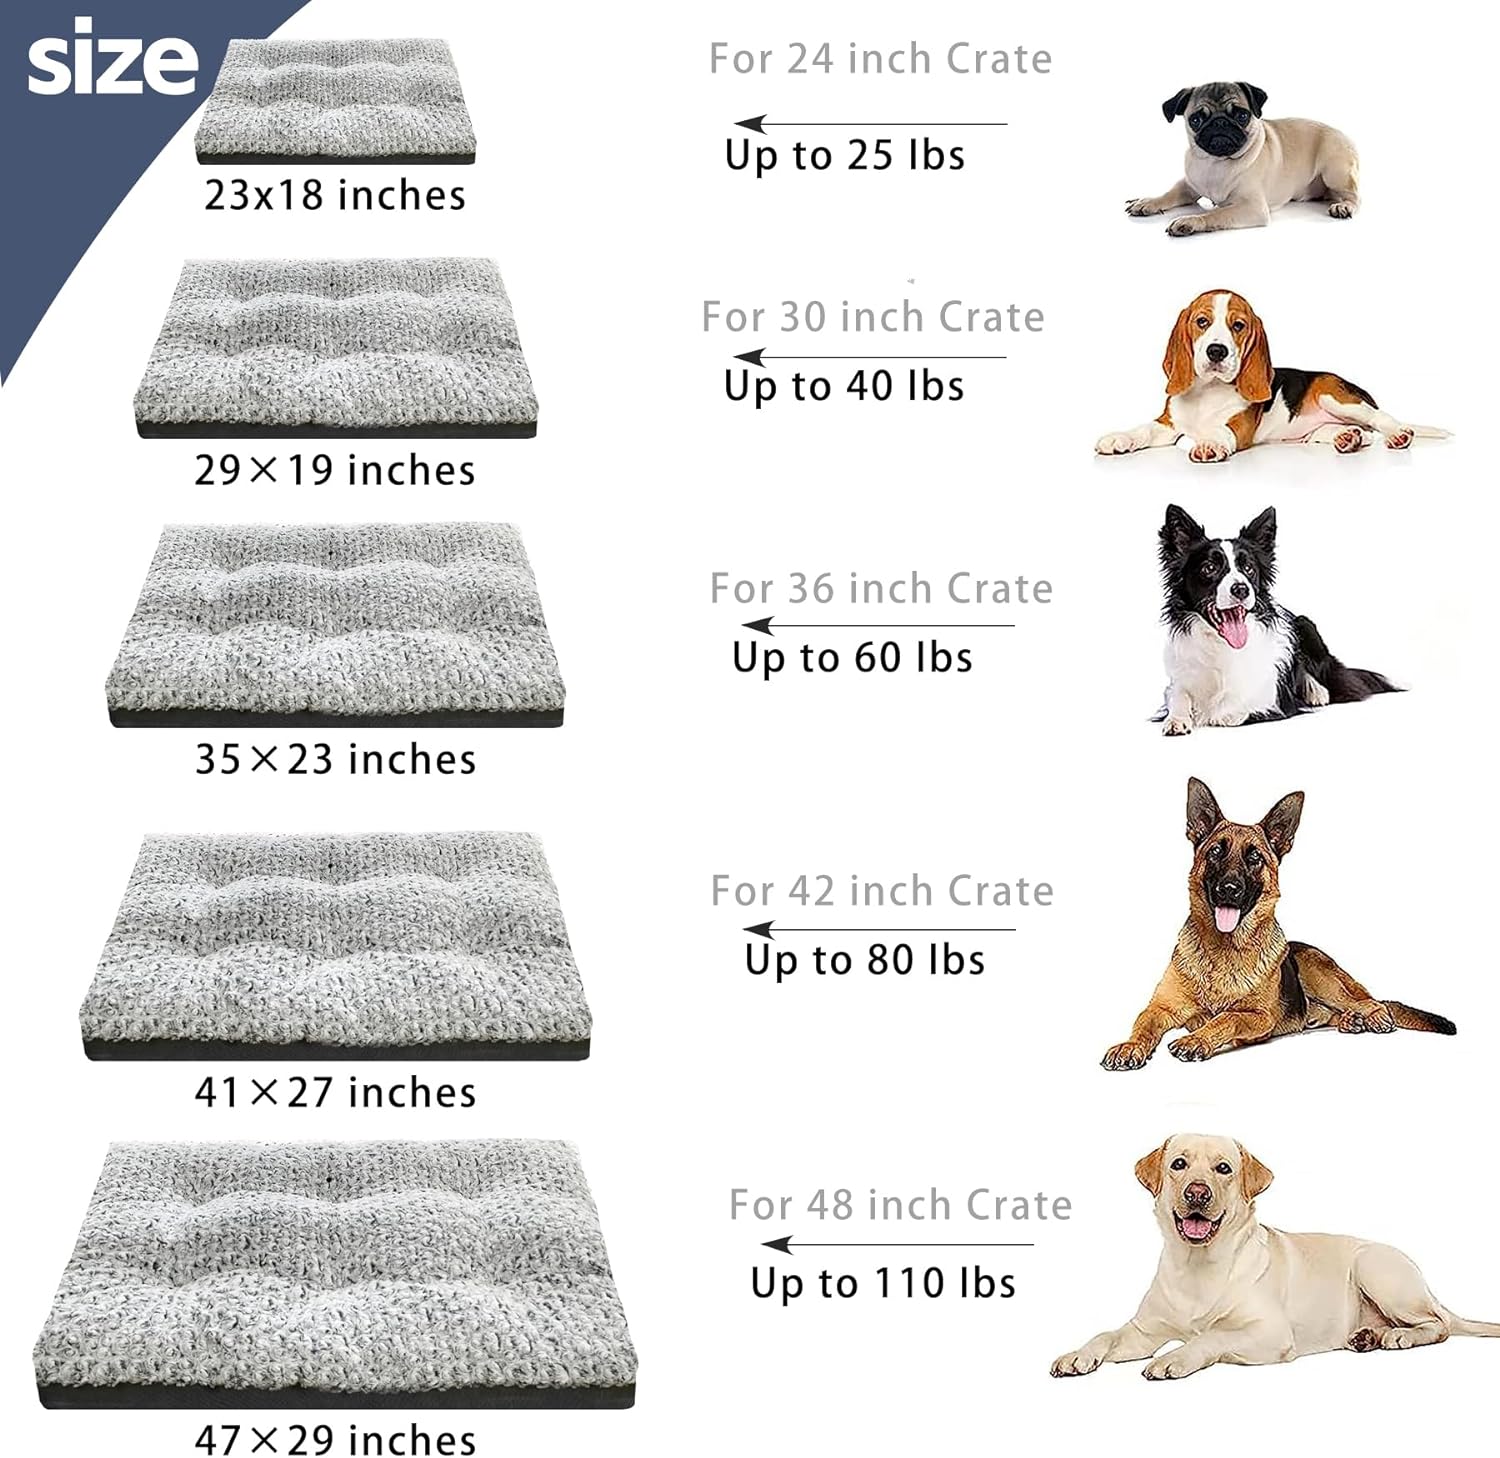 IHINIRE Washable Dog Crate Bed Deluxe Plush Dog Beds Reversible All-Seasons Bed Pet Sleeping Mattress for Large, Medium Dogs